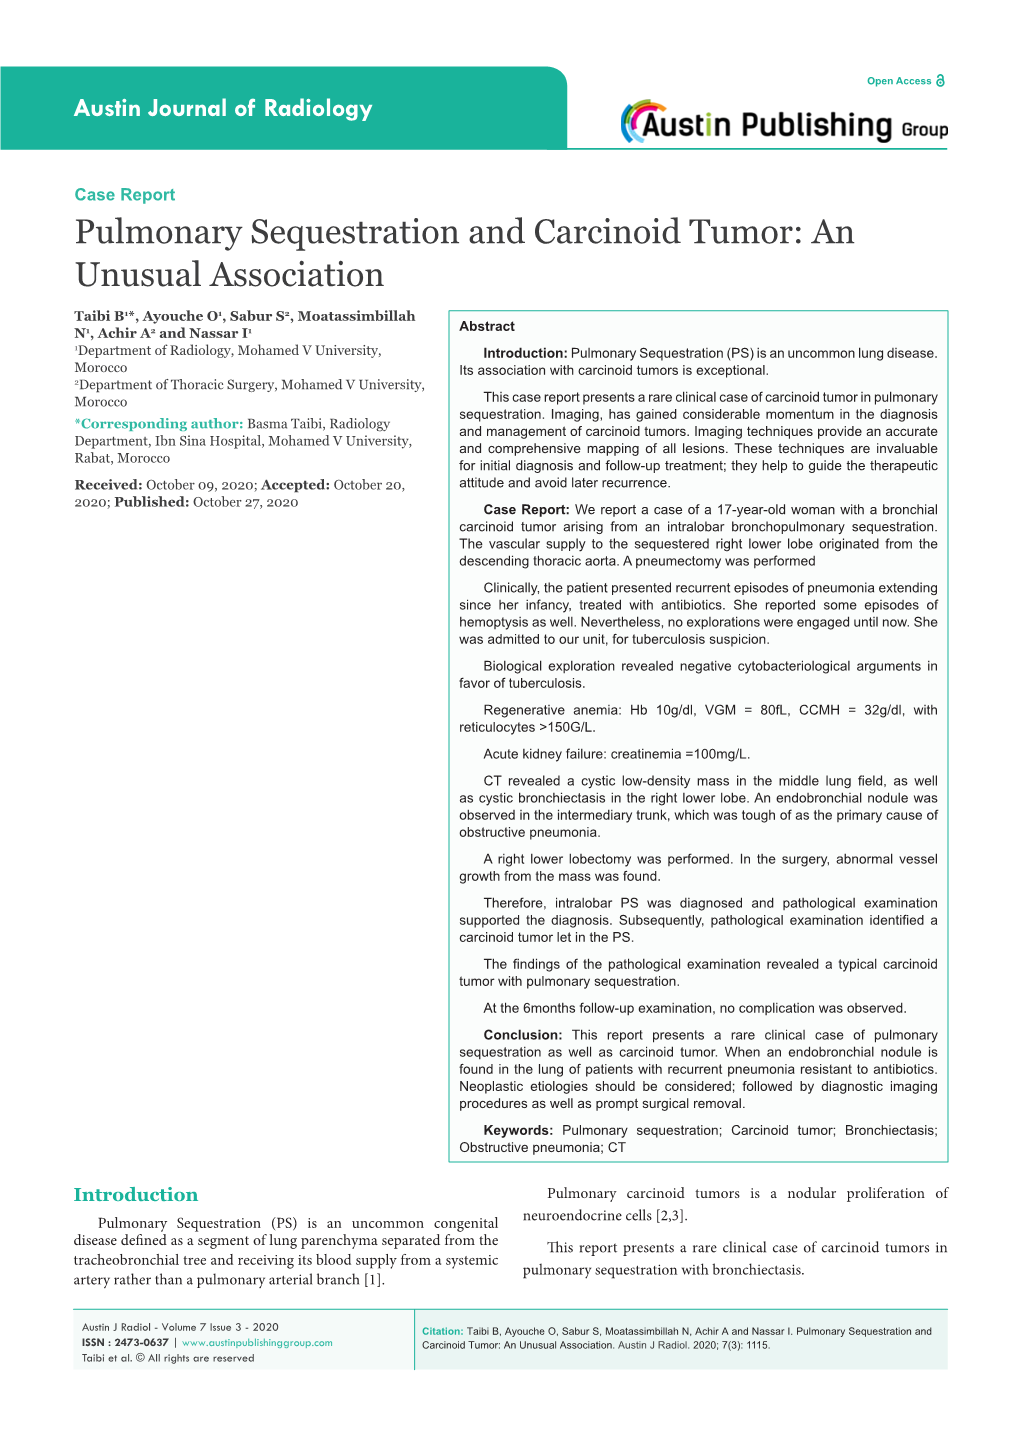 Pulmonary Sequestration and Carcinoid Tumor: an Unusual Association